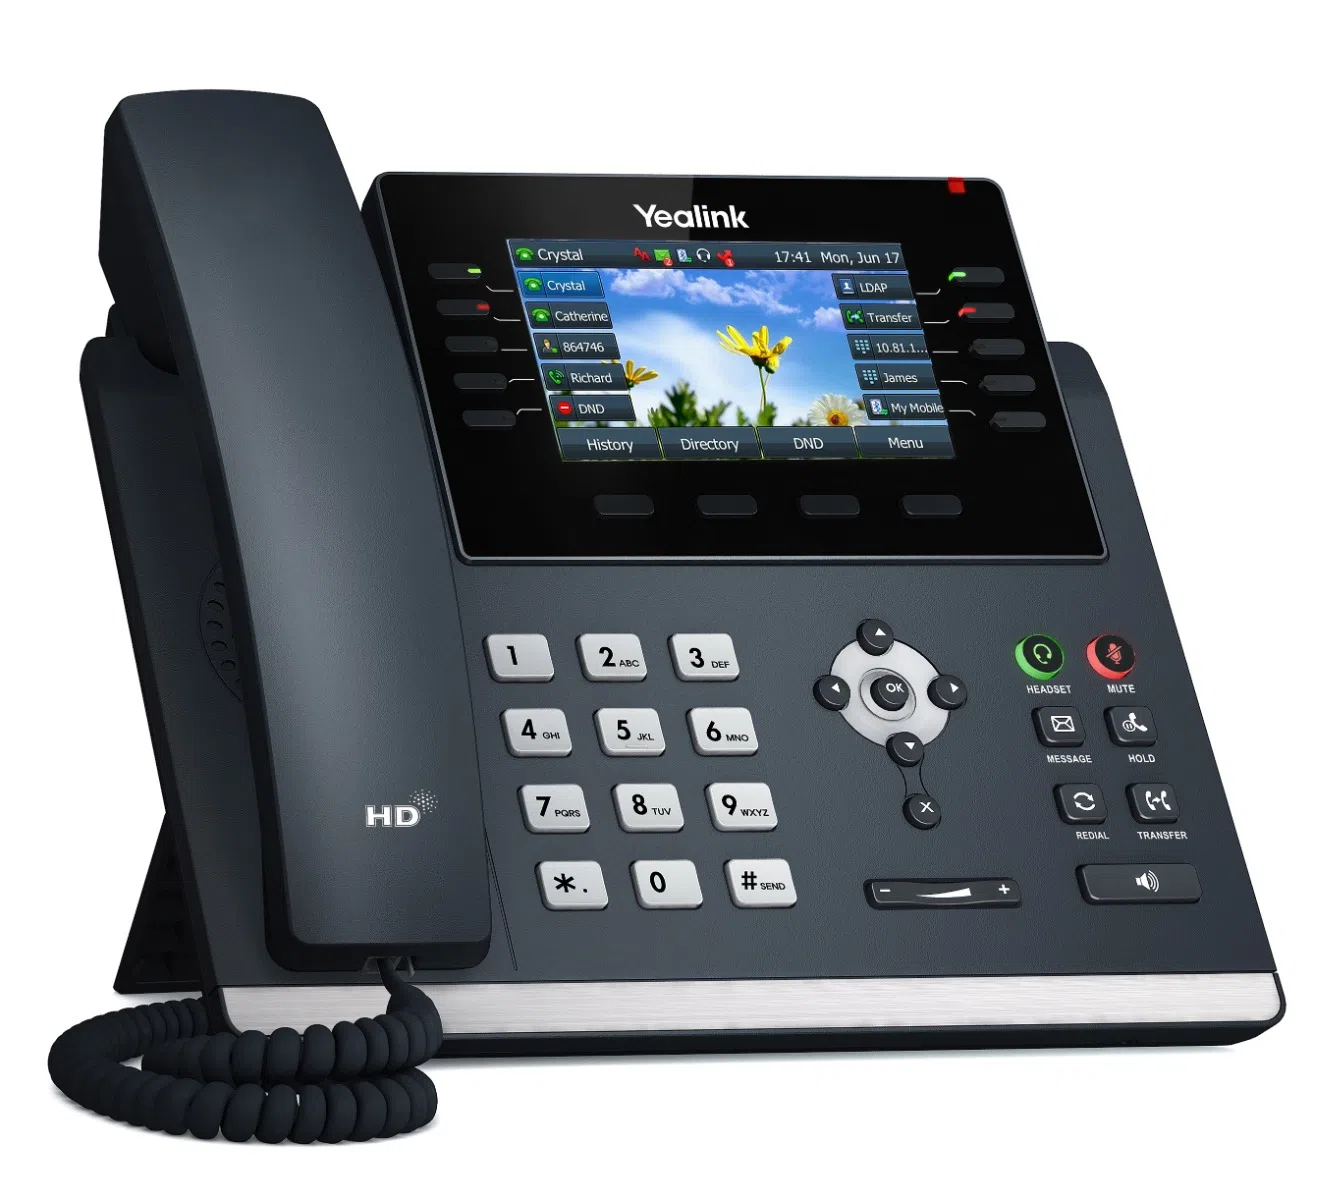 Yealink SIP-T46U IP Phone 1301203 Questions & Answers